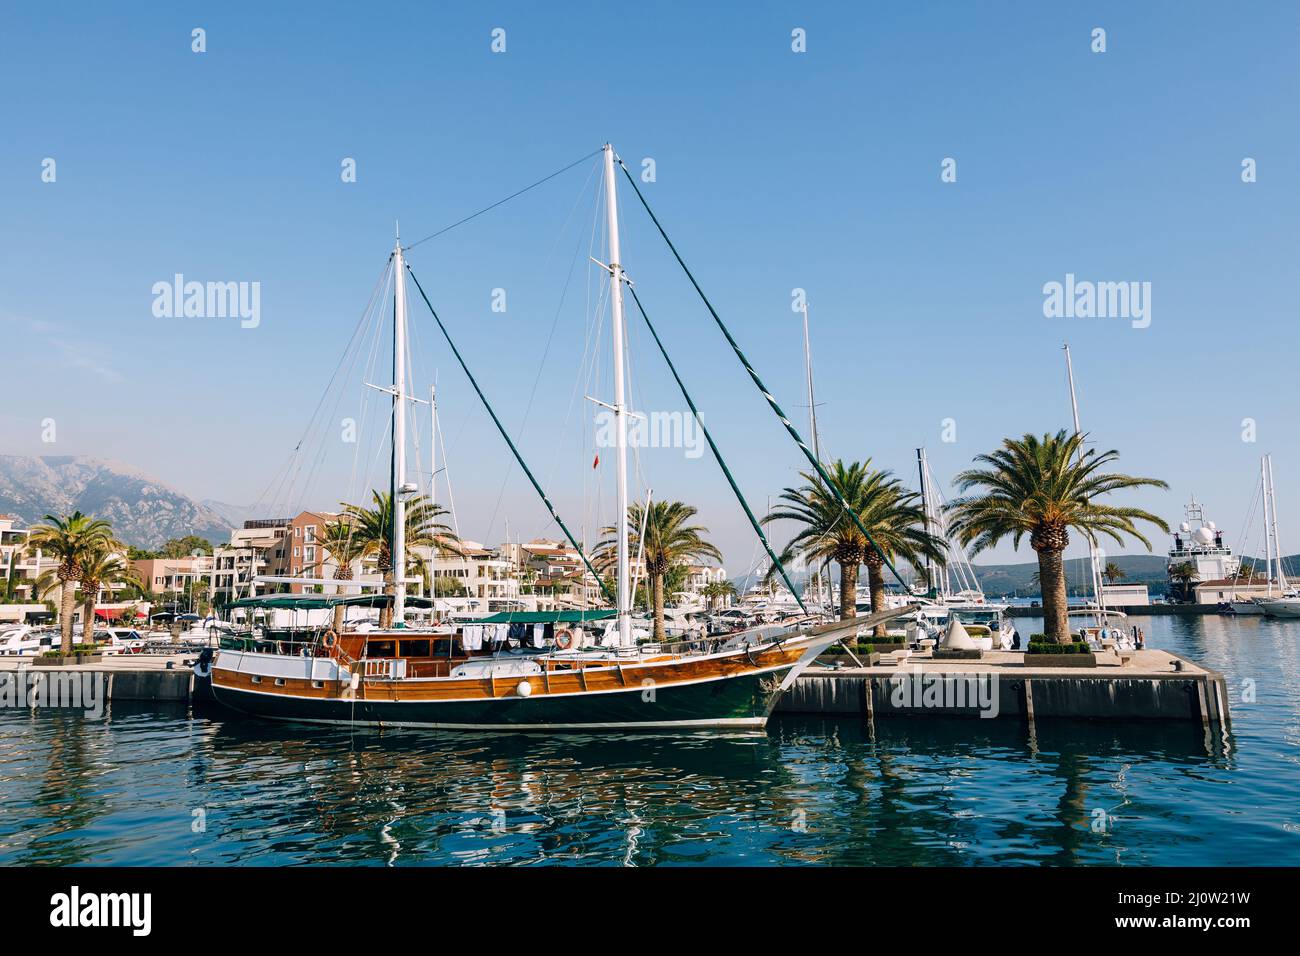 Sailing yacht stands at the pier lined with palm trees in the resort of Porto. Montenegro Stock Photo